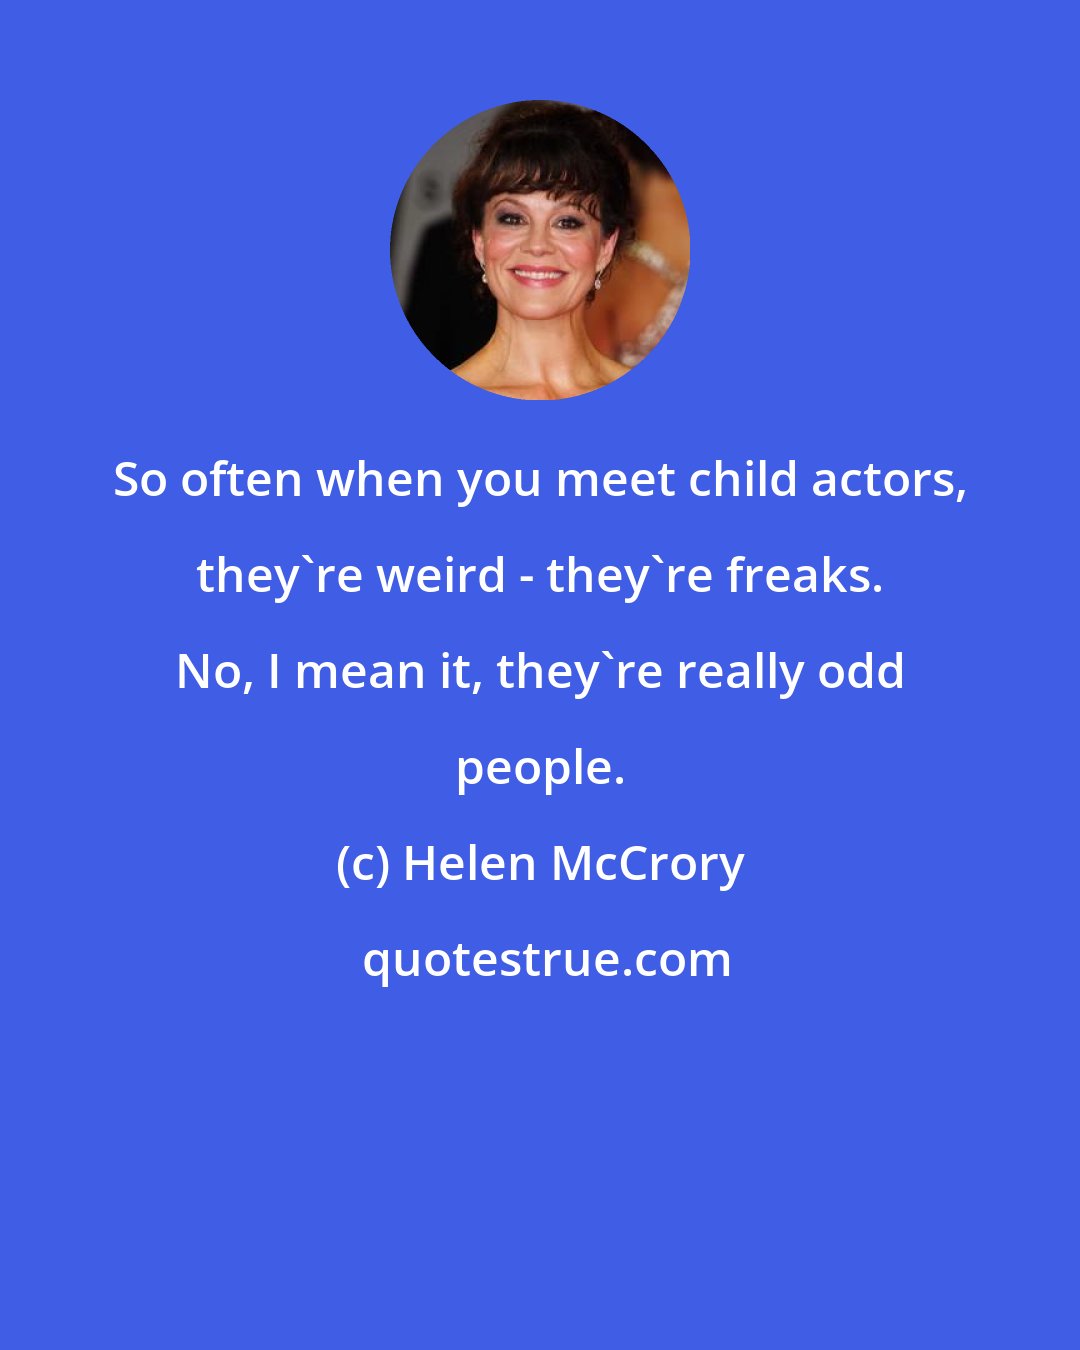 Helen McCrory: So often when you meet child actors, they're weird - they're freaks. No, I mean it, they're really odd people.